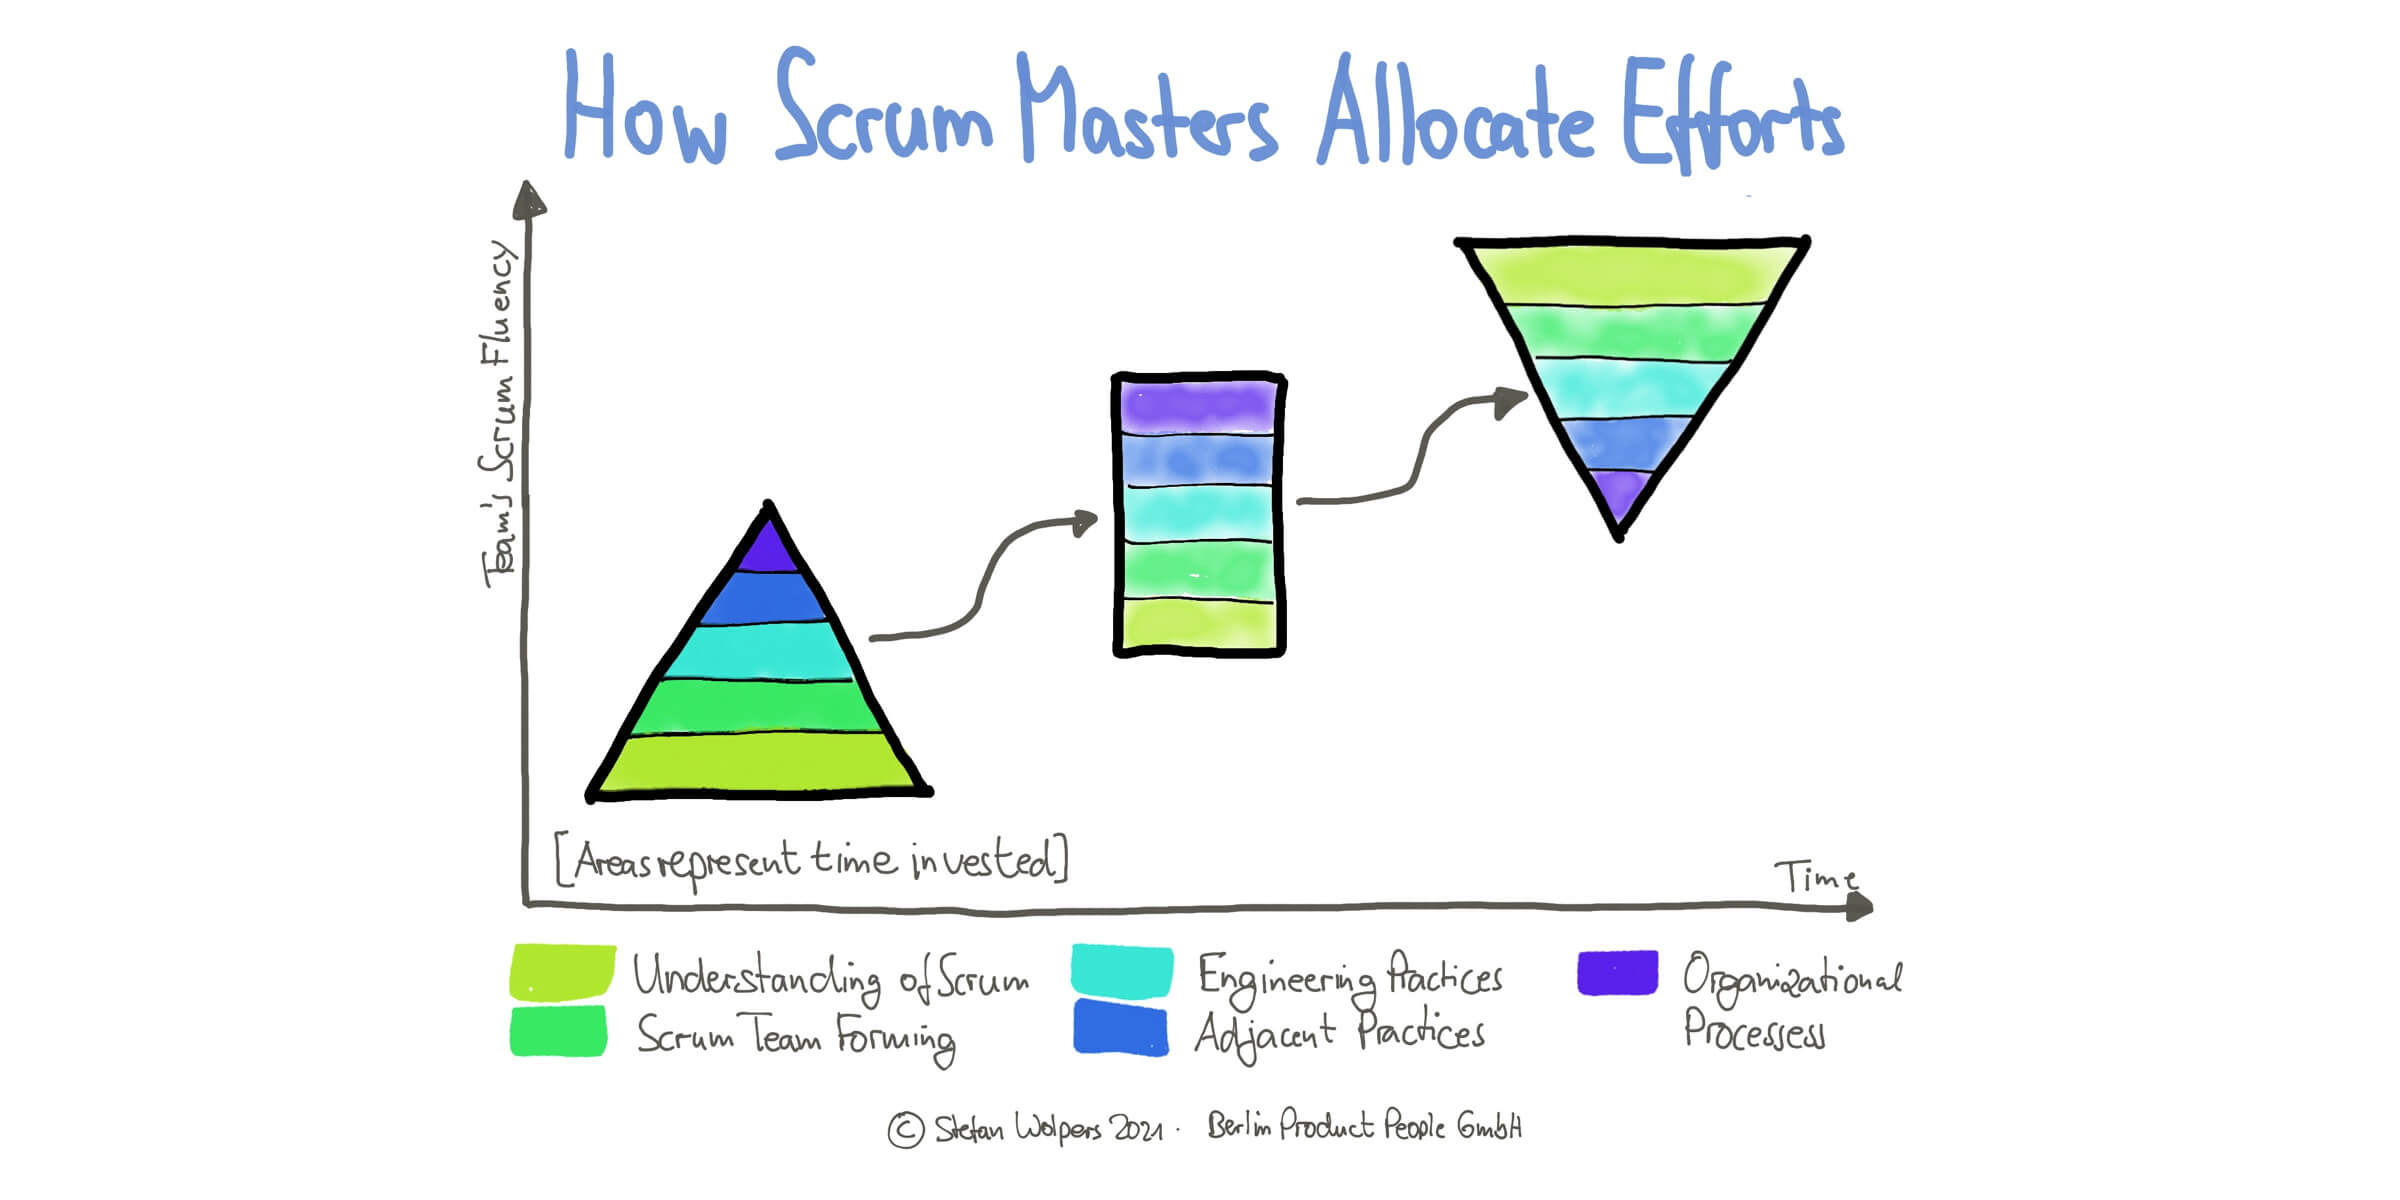 Do We Need Agile Coaches when Practicing Scrum? — Berlin Product People GmbH